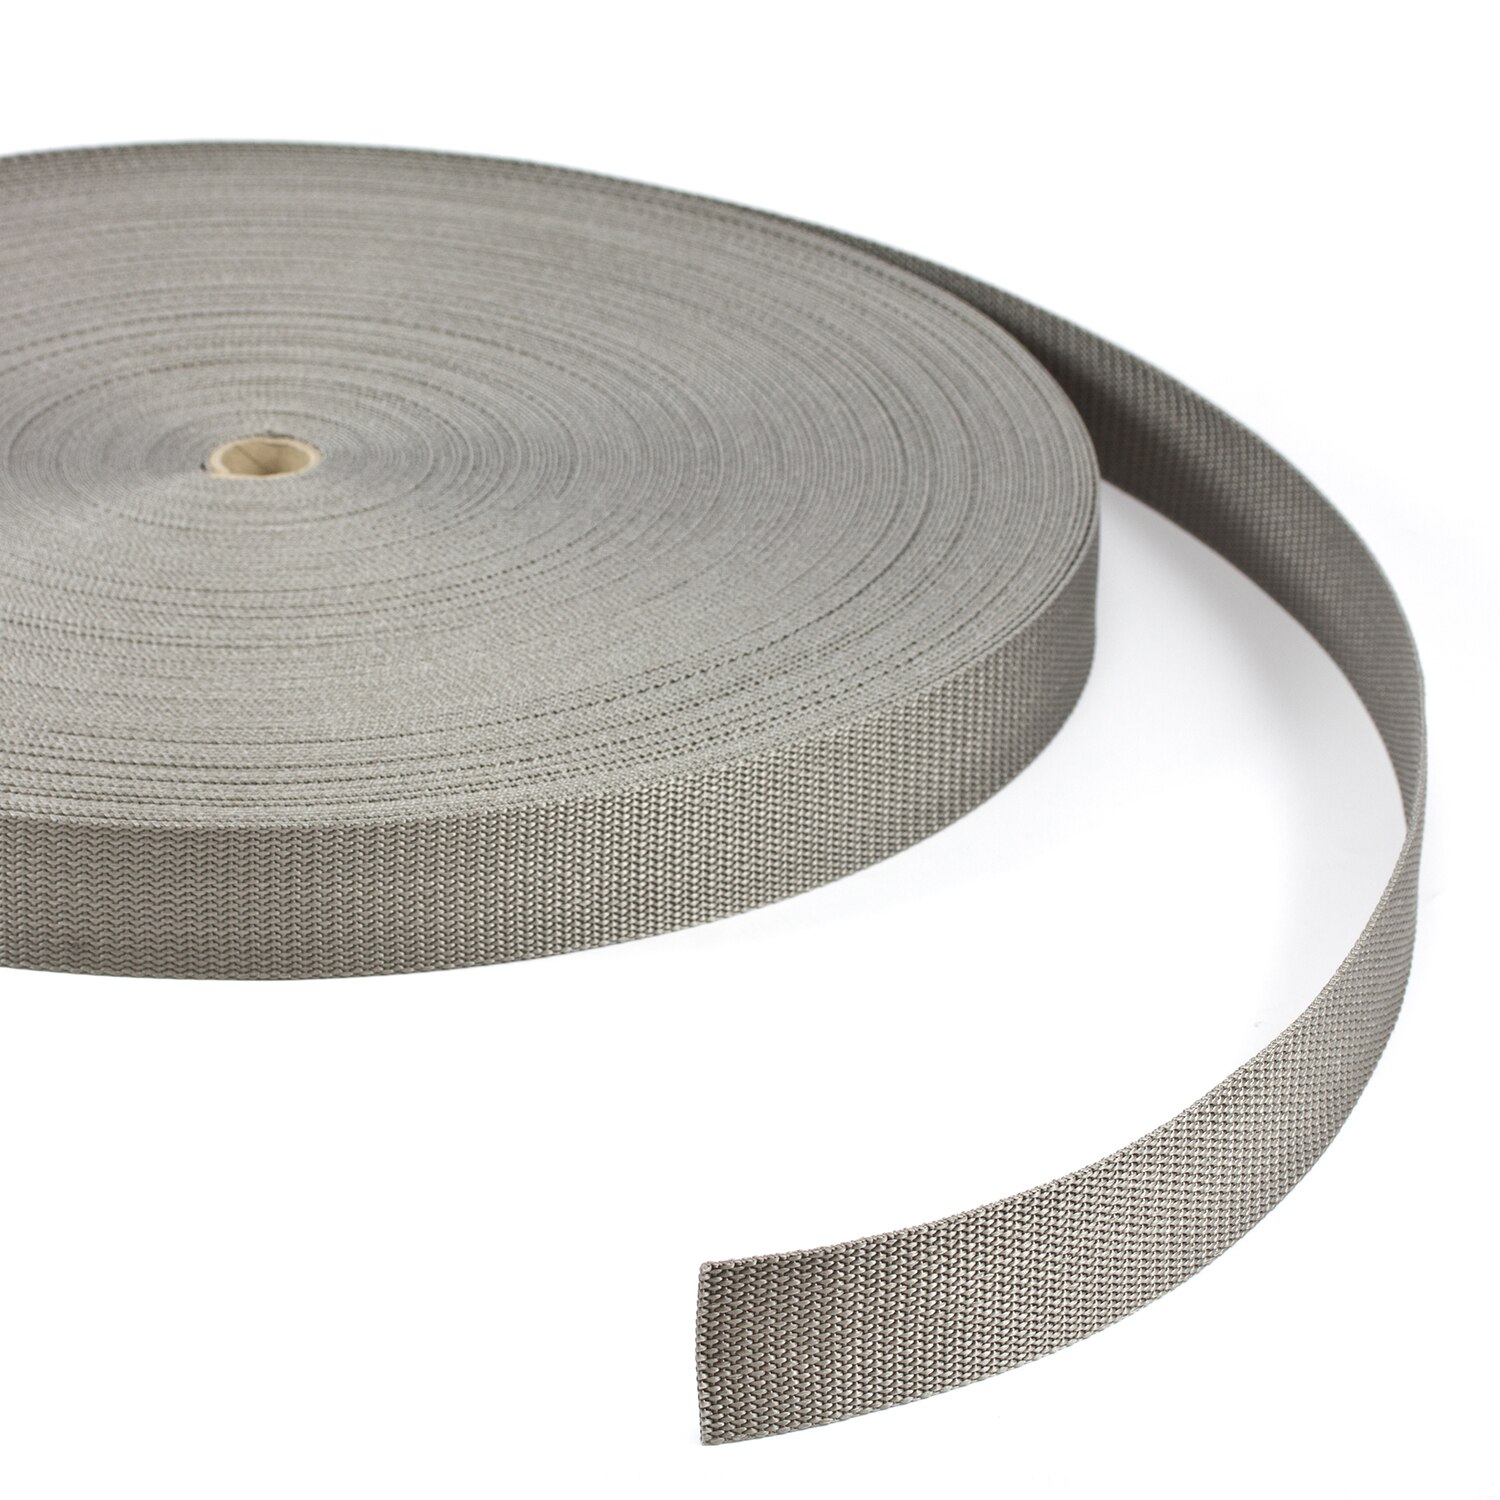 2 X100' Cotton Strapping